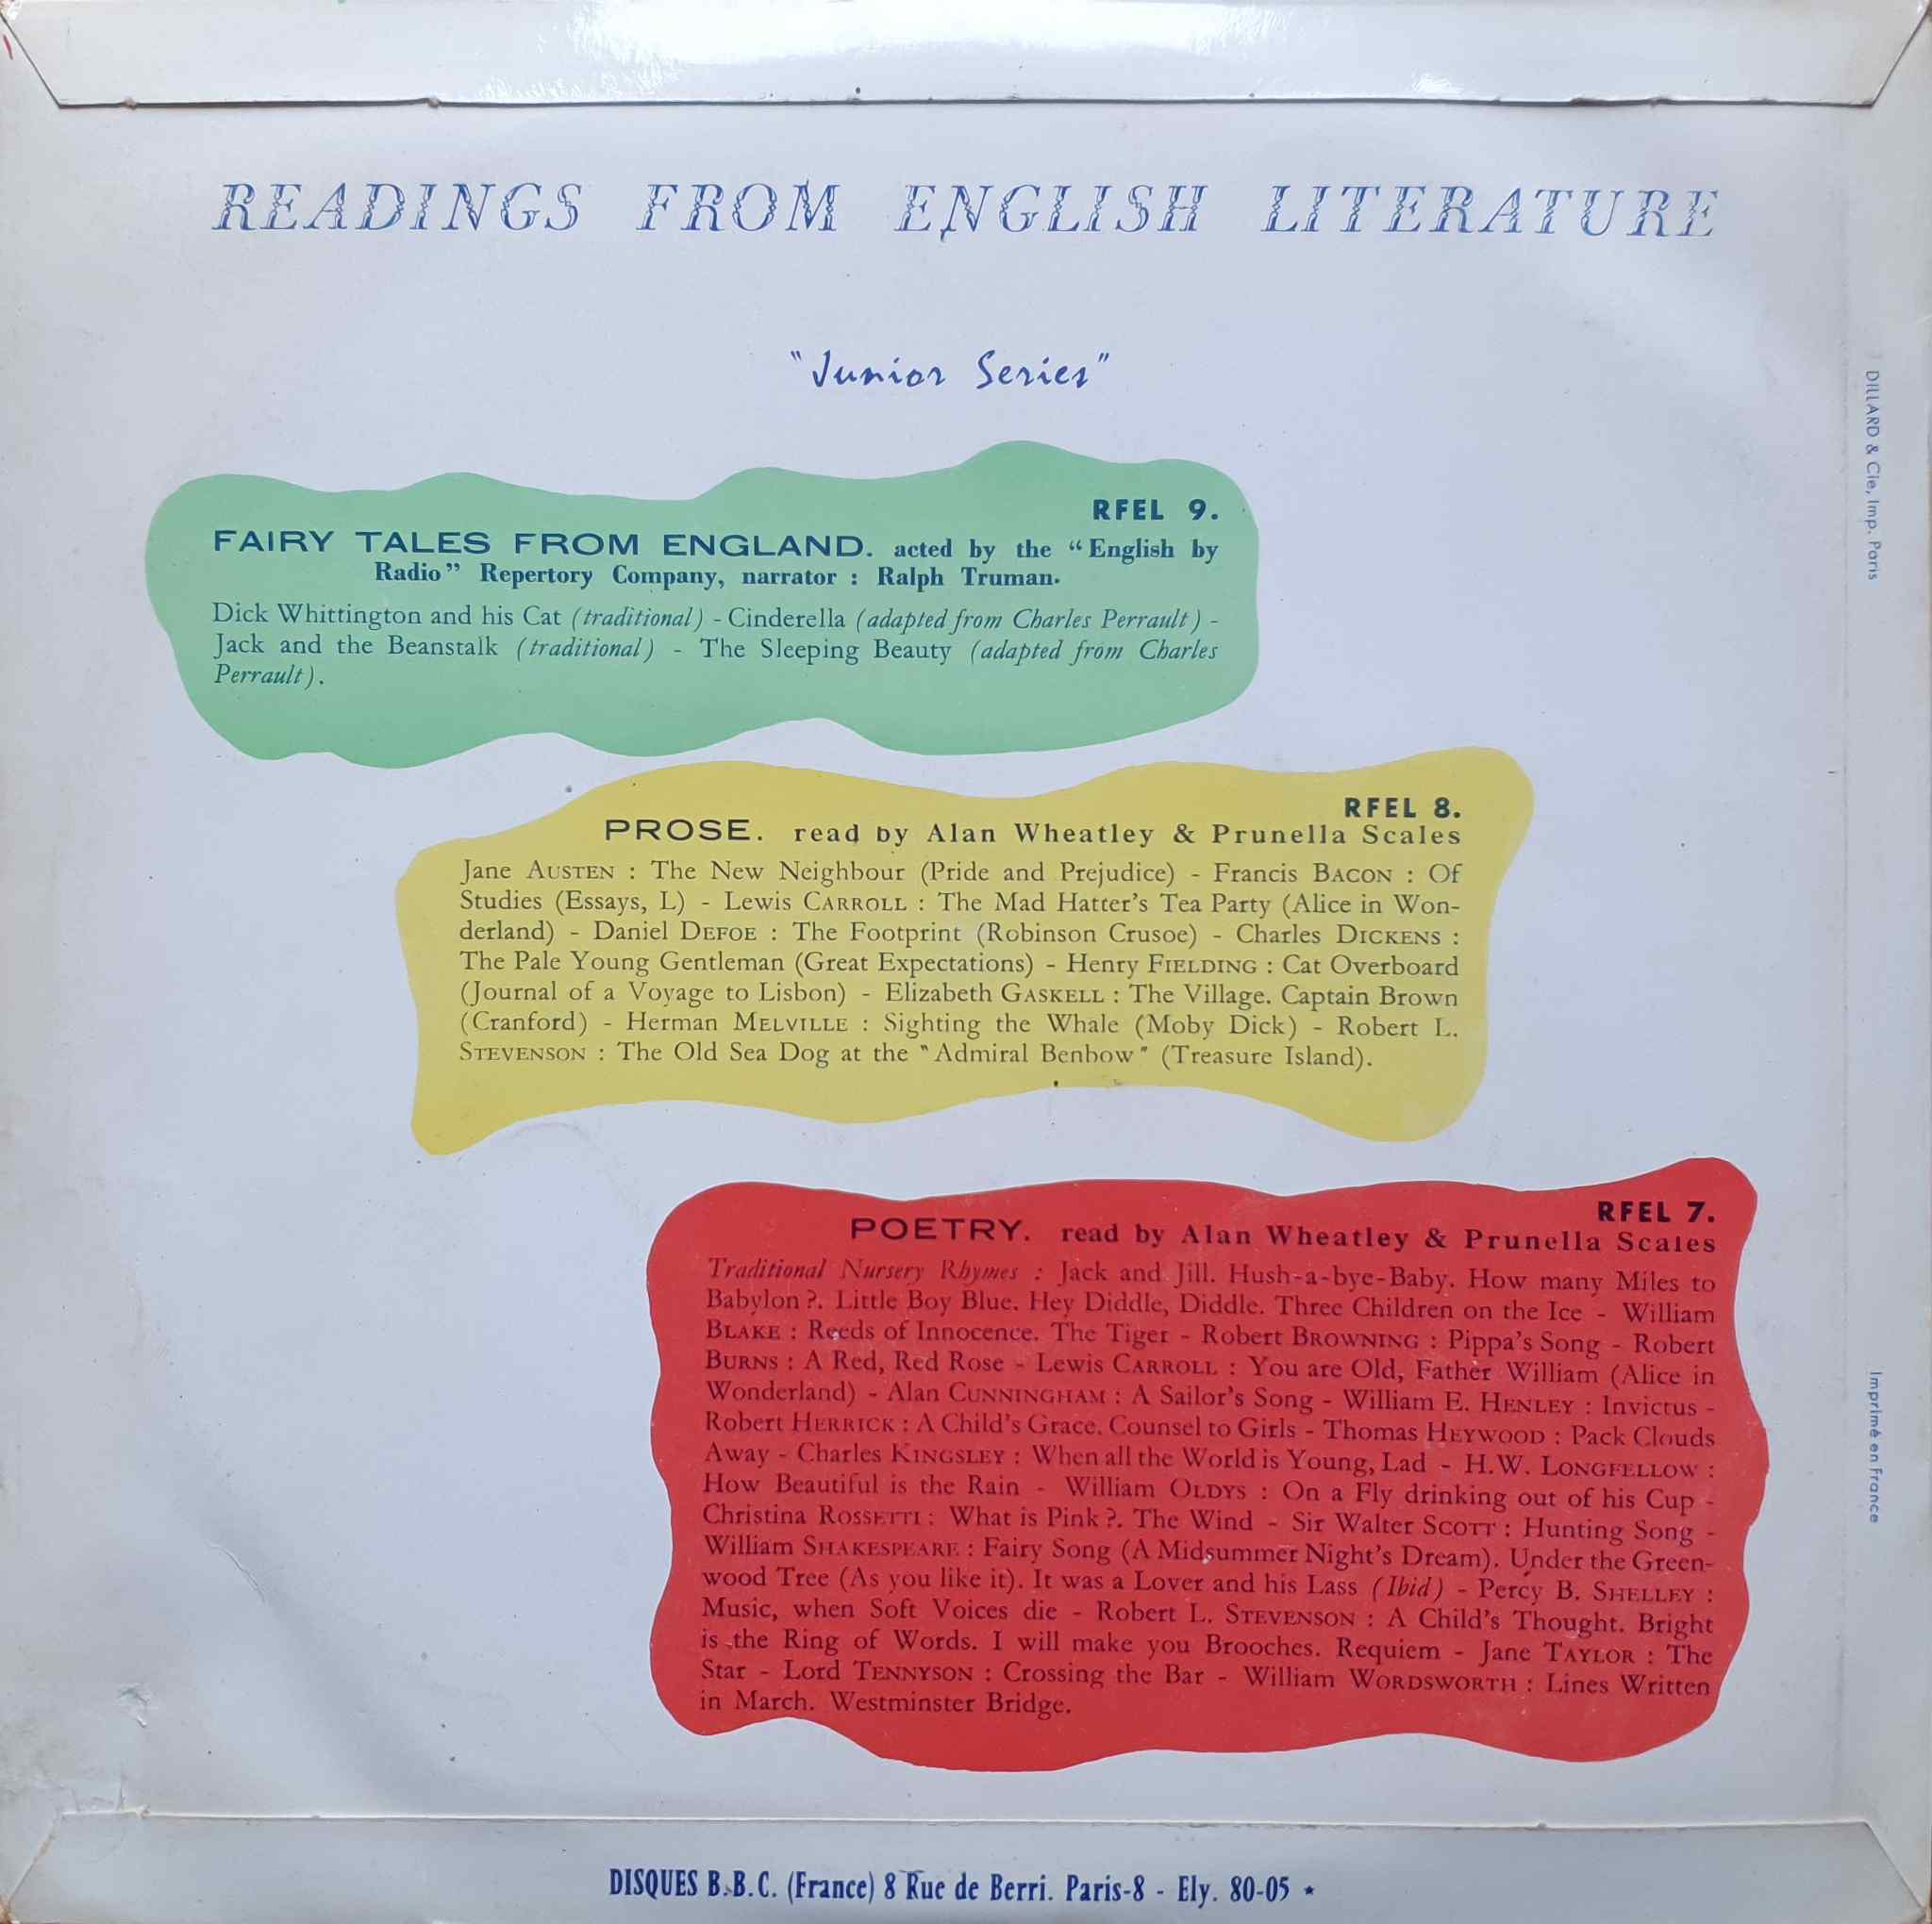 Picture of RFEL 9 Junior Series III - Readings from English literature by artist Traditional / Charles Perrault from the BBC records and Tapes library